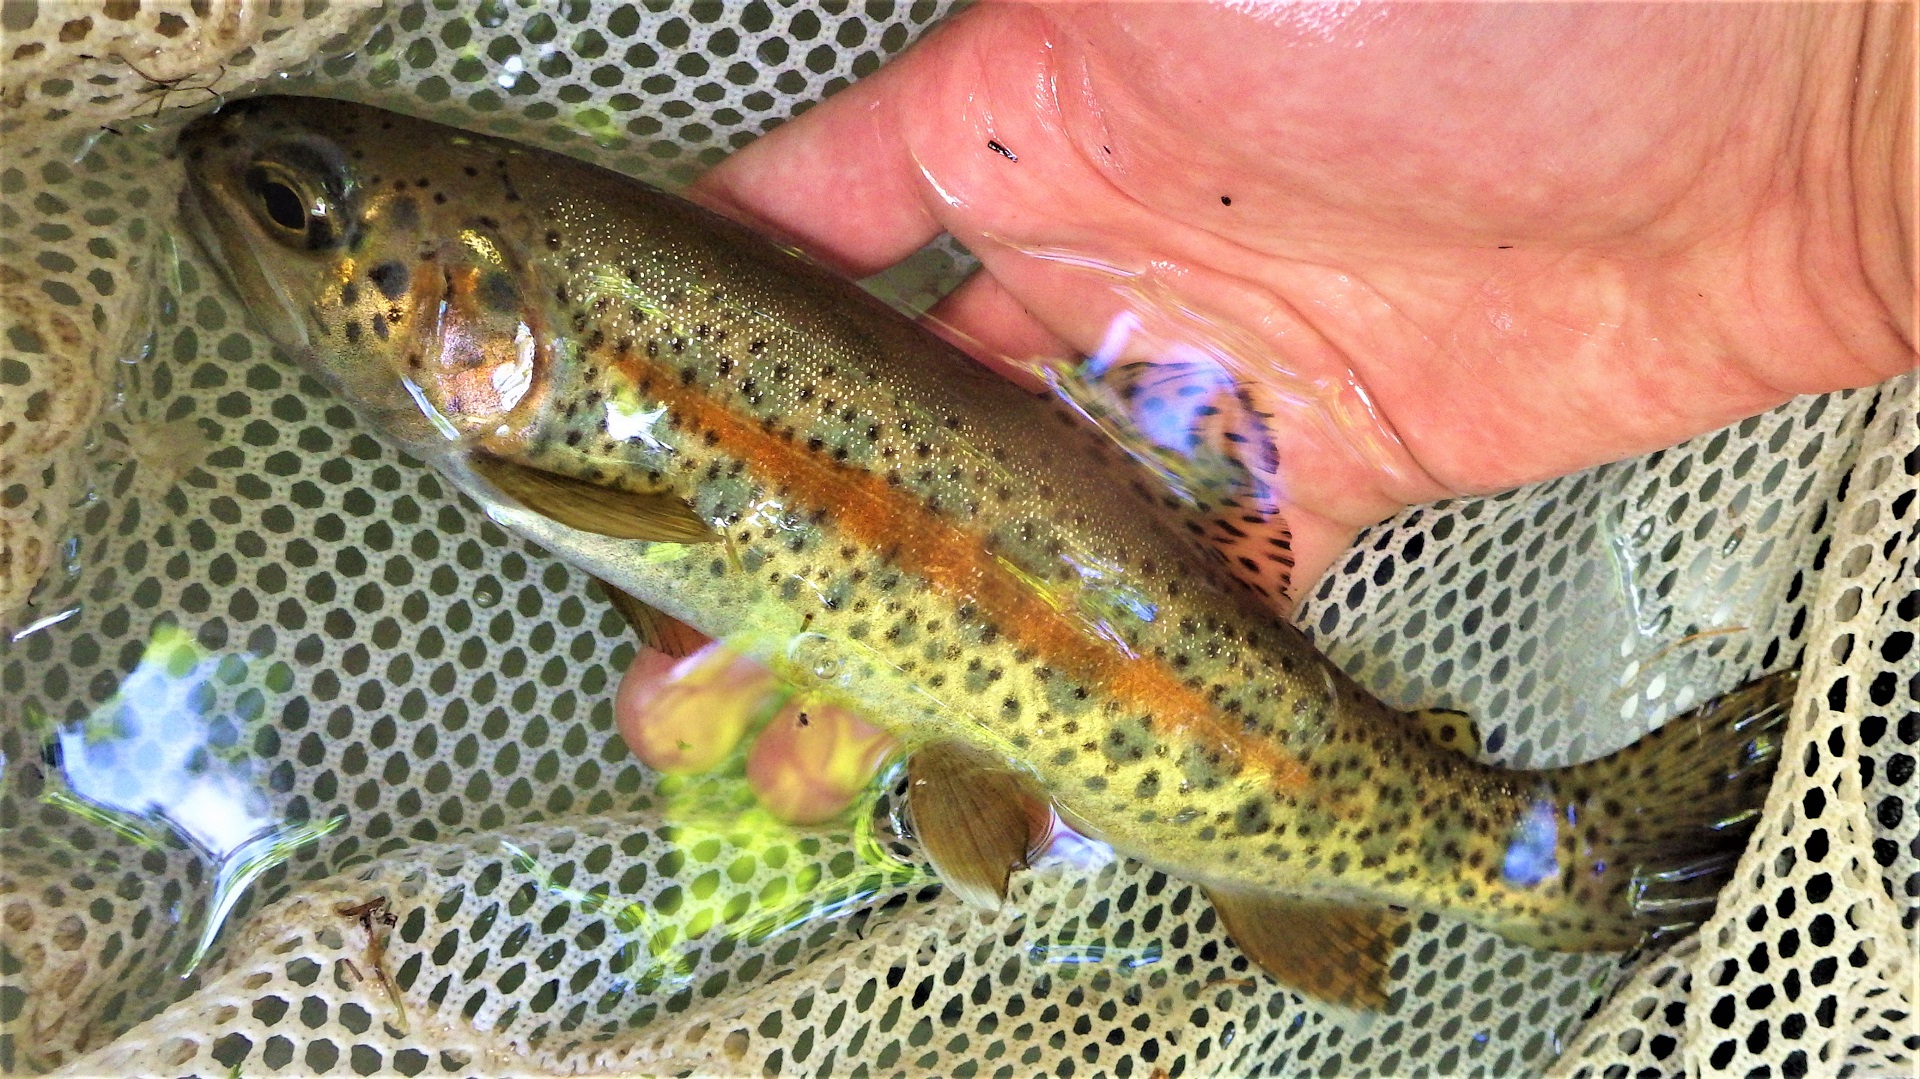 A large trout with a red strip being held above a net